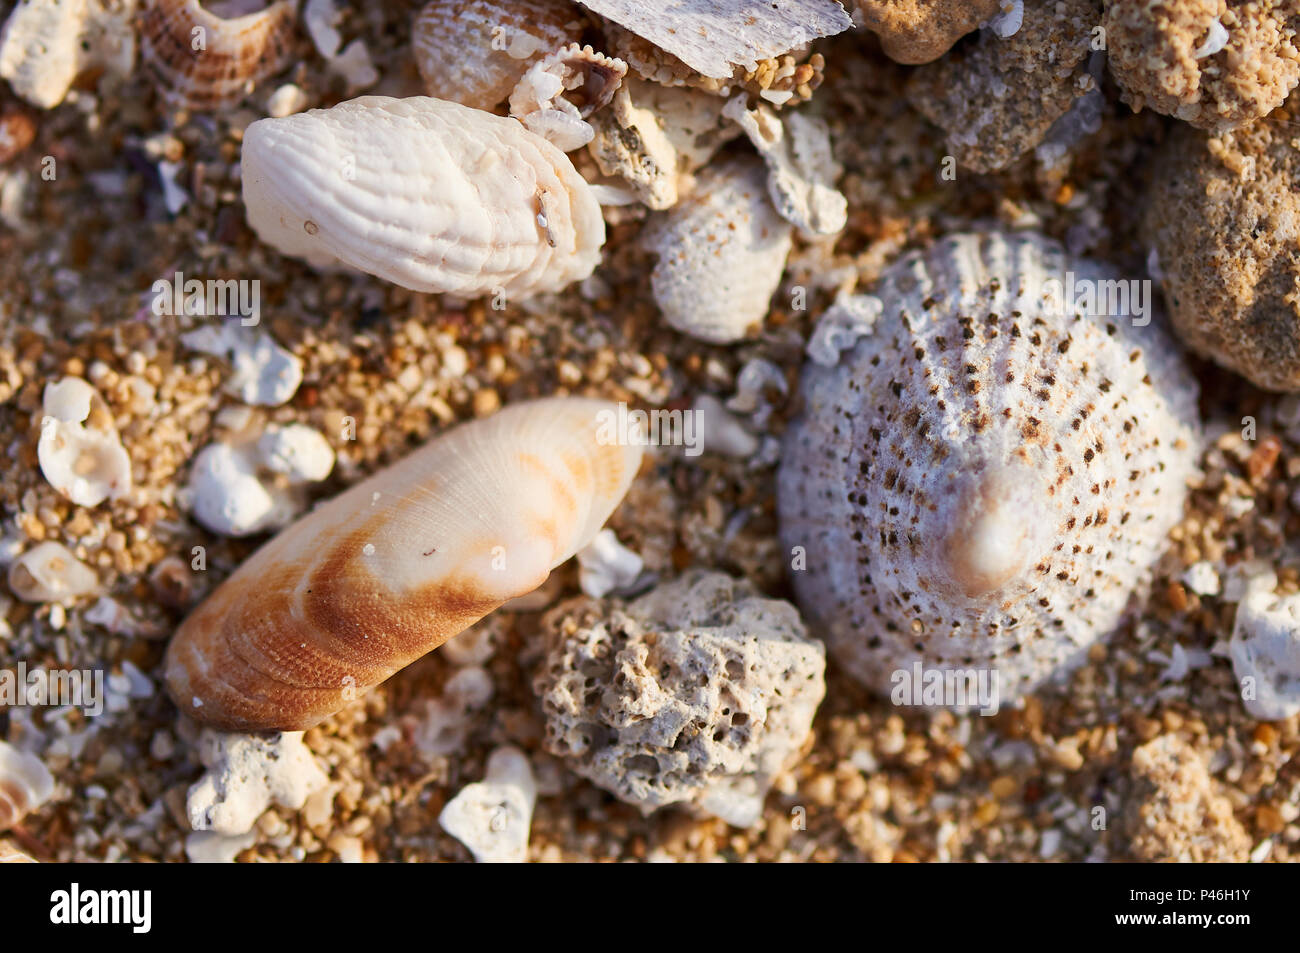 Macro detail of a variety of seashells (limpet and bivalve) and rocks in the sand in Ses Salines Natural Park (Formentera, Balearic Islands, Spain) Stock Photo